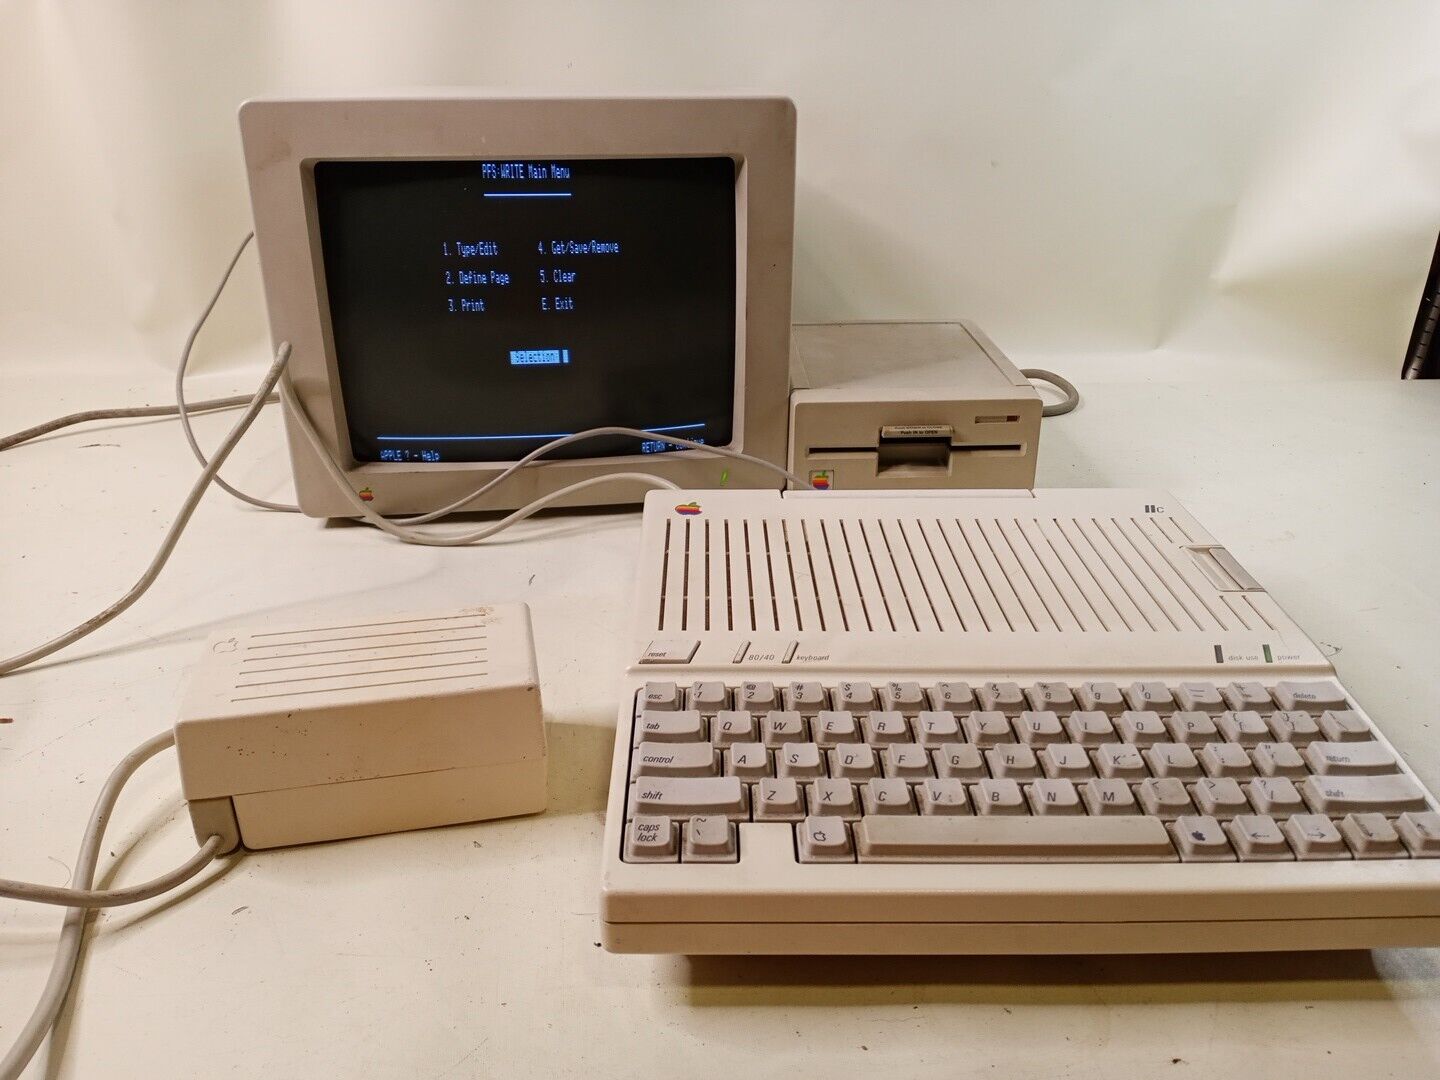 Apple IIC A2S4100 Keyboard With Monitor And Drive - Tested Works